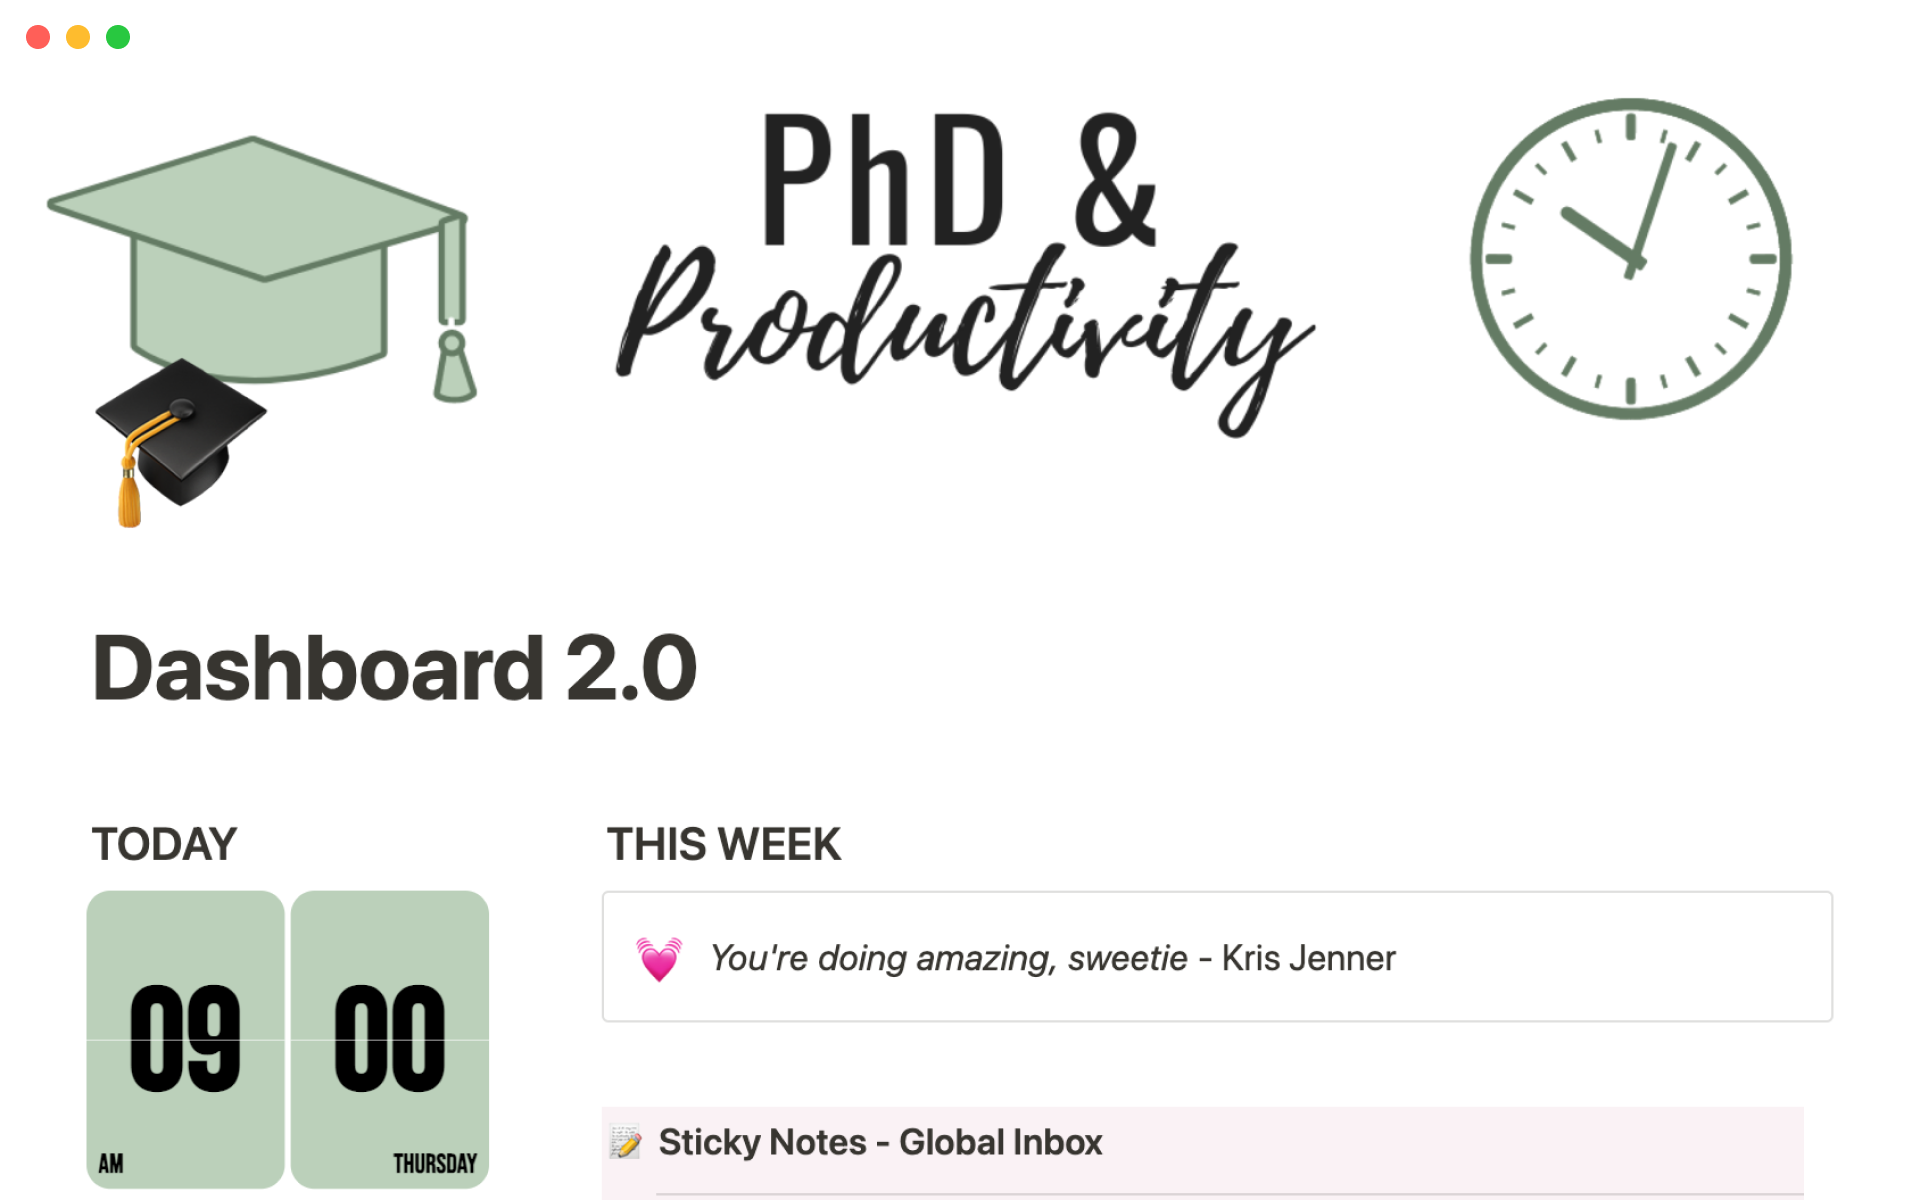 A full dashboard for PhD students to organise thesis notes, meeting notes, research diary, set goals, manage projects and tasks.